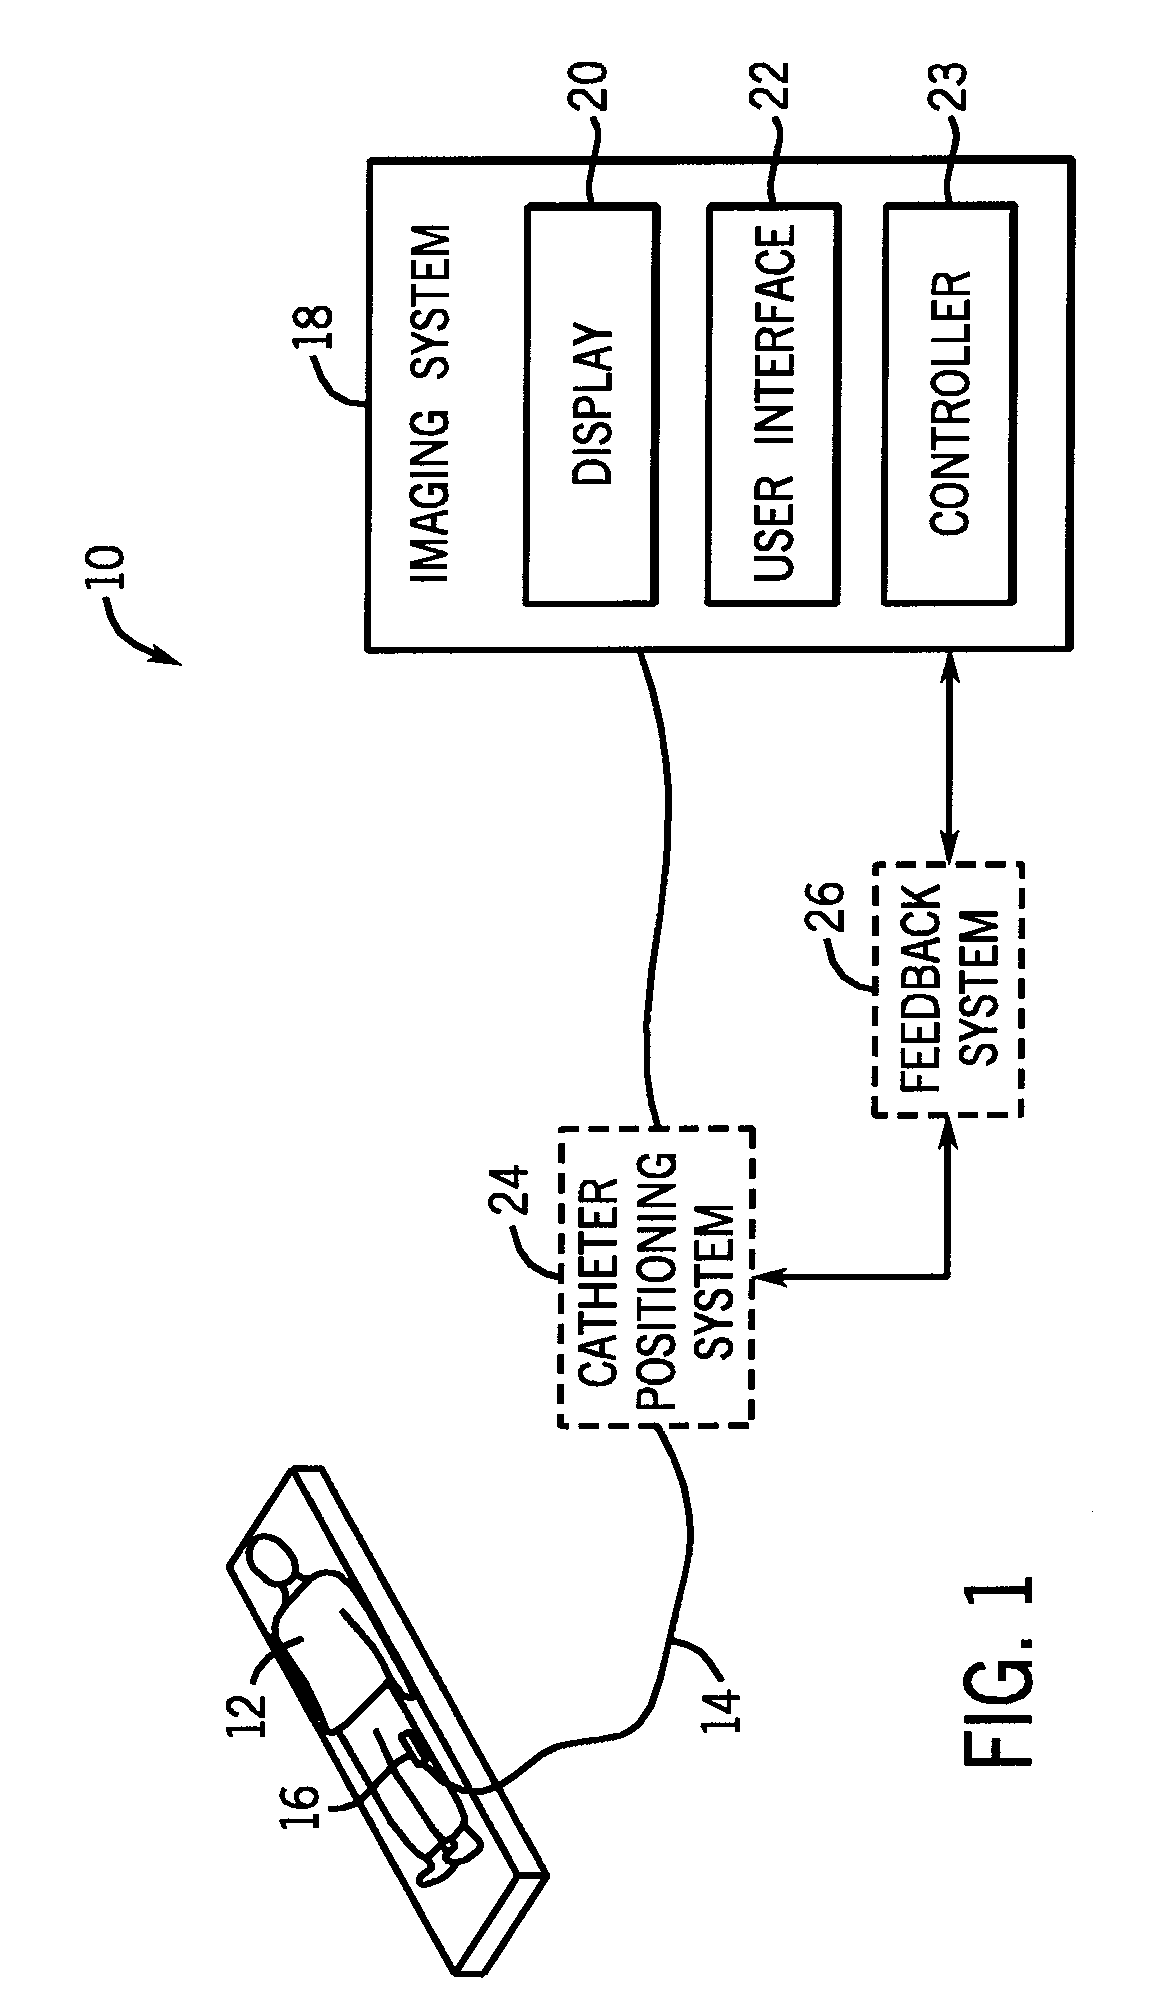 Integrated ultrasound imaging and ablation probe